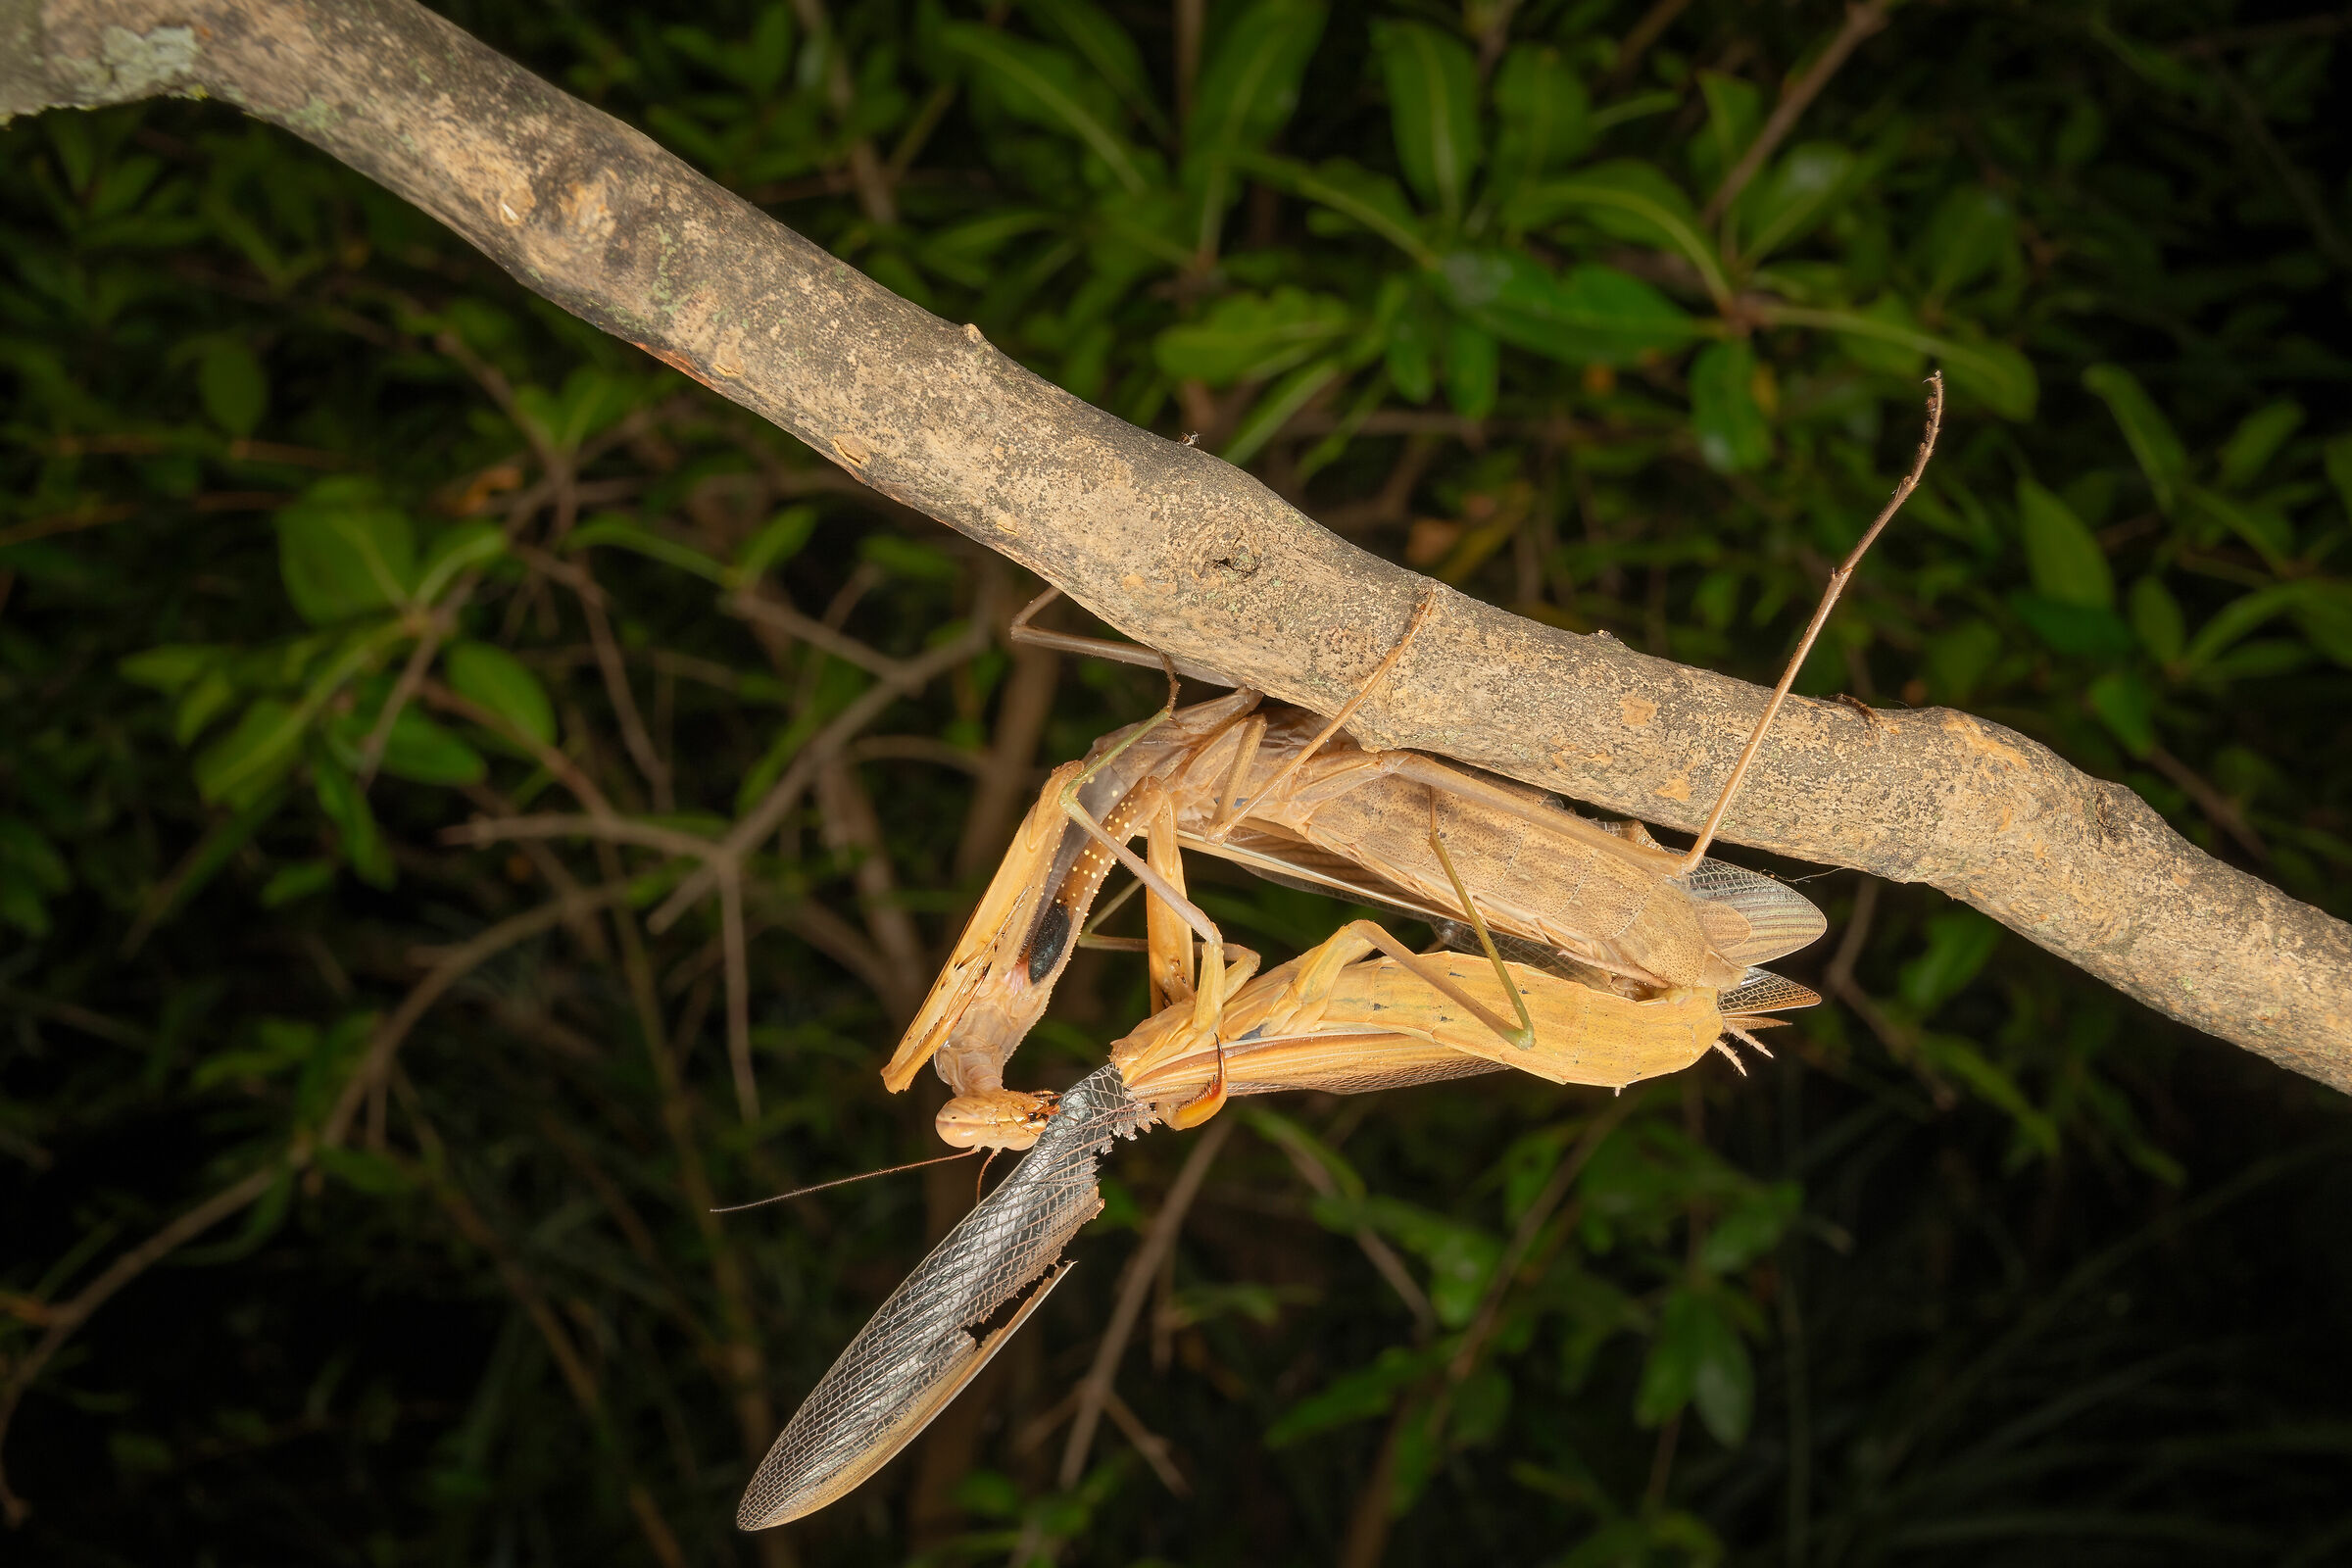 The mating of the mantis, 9...